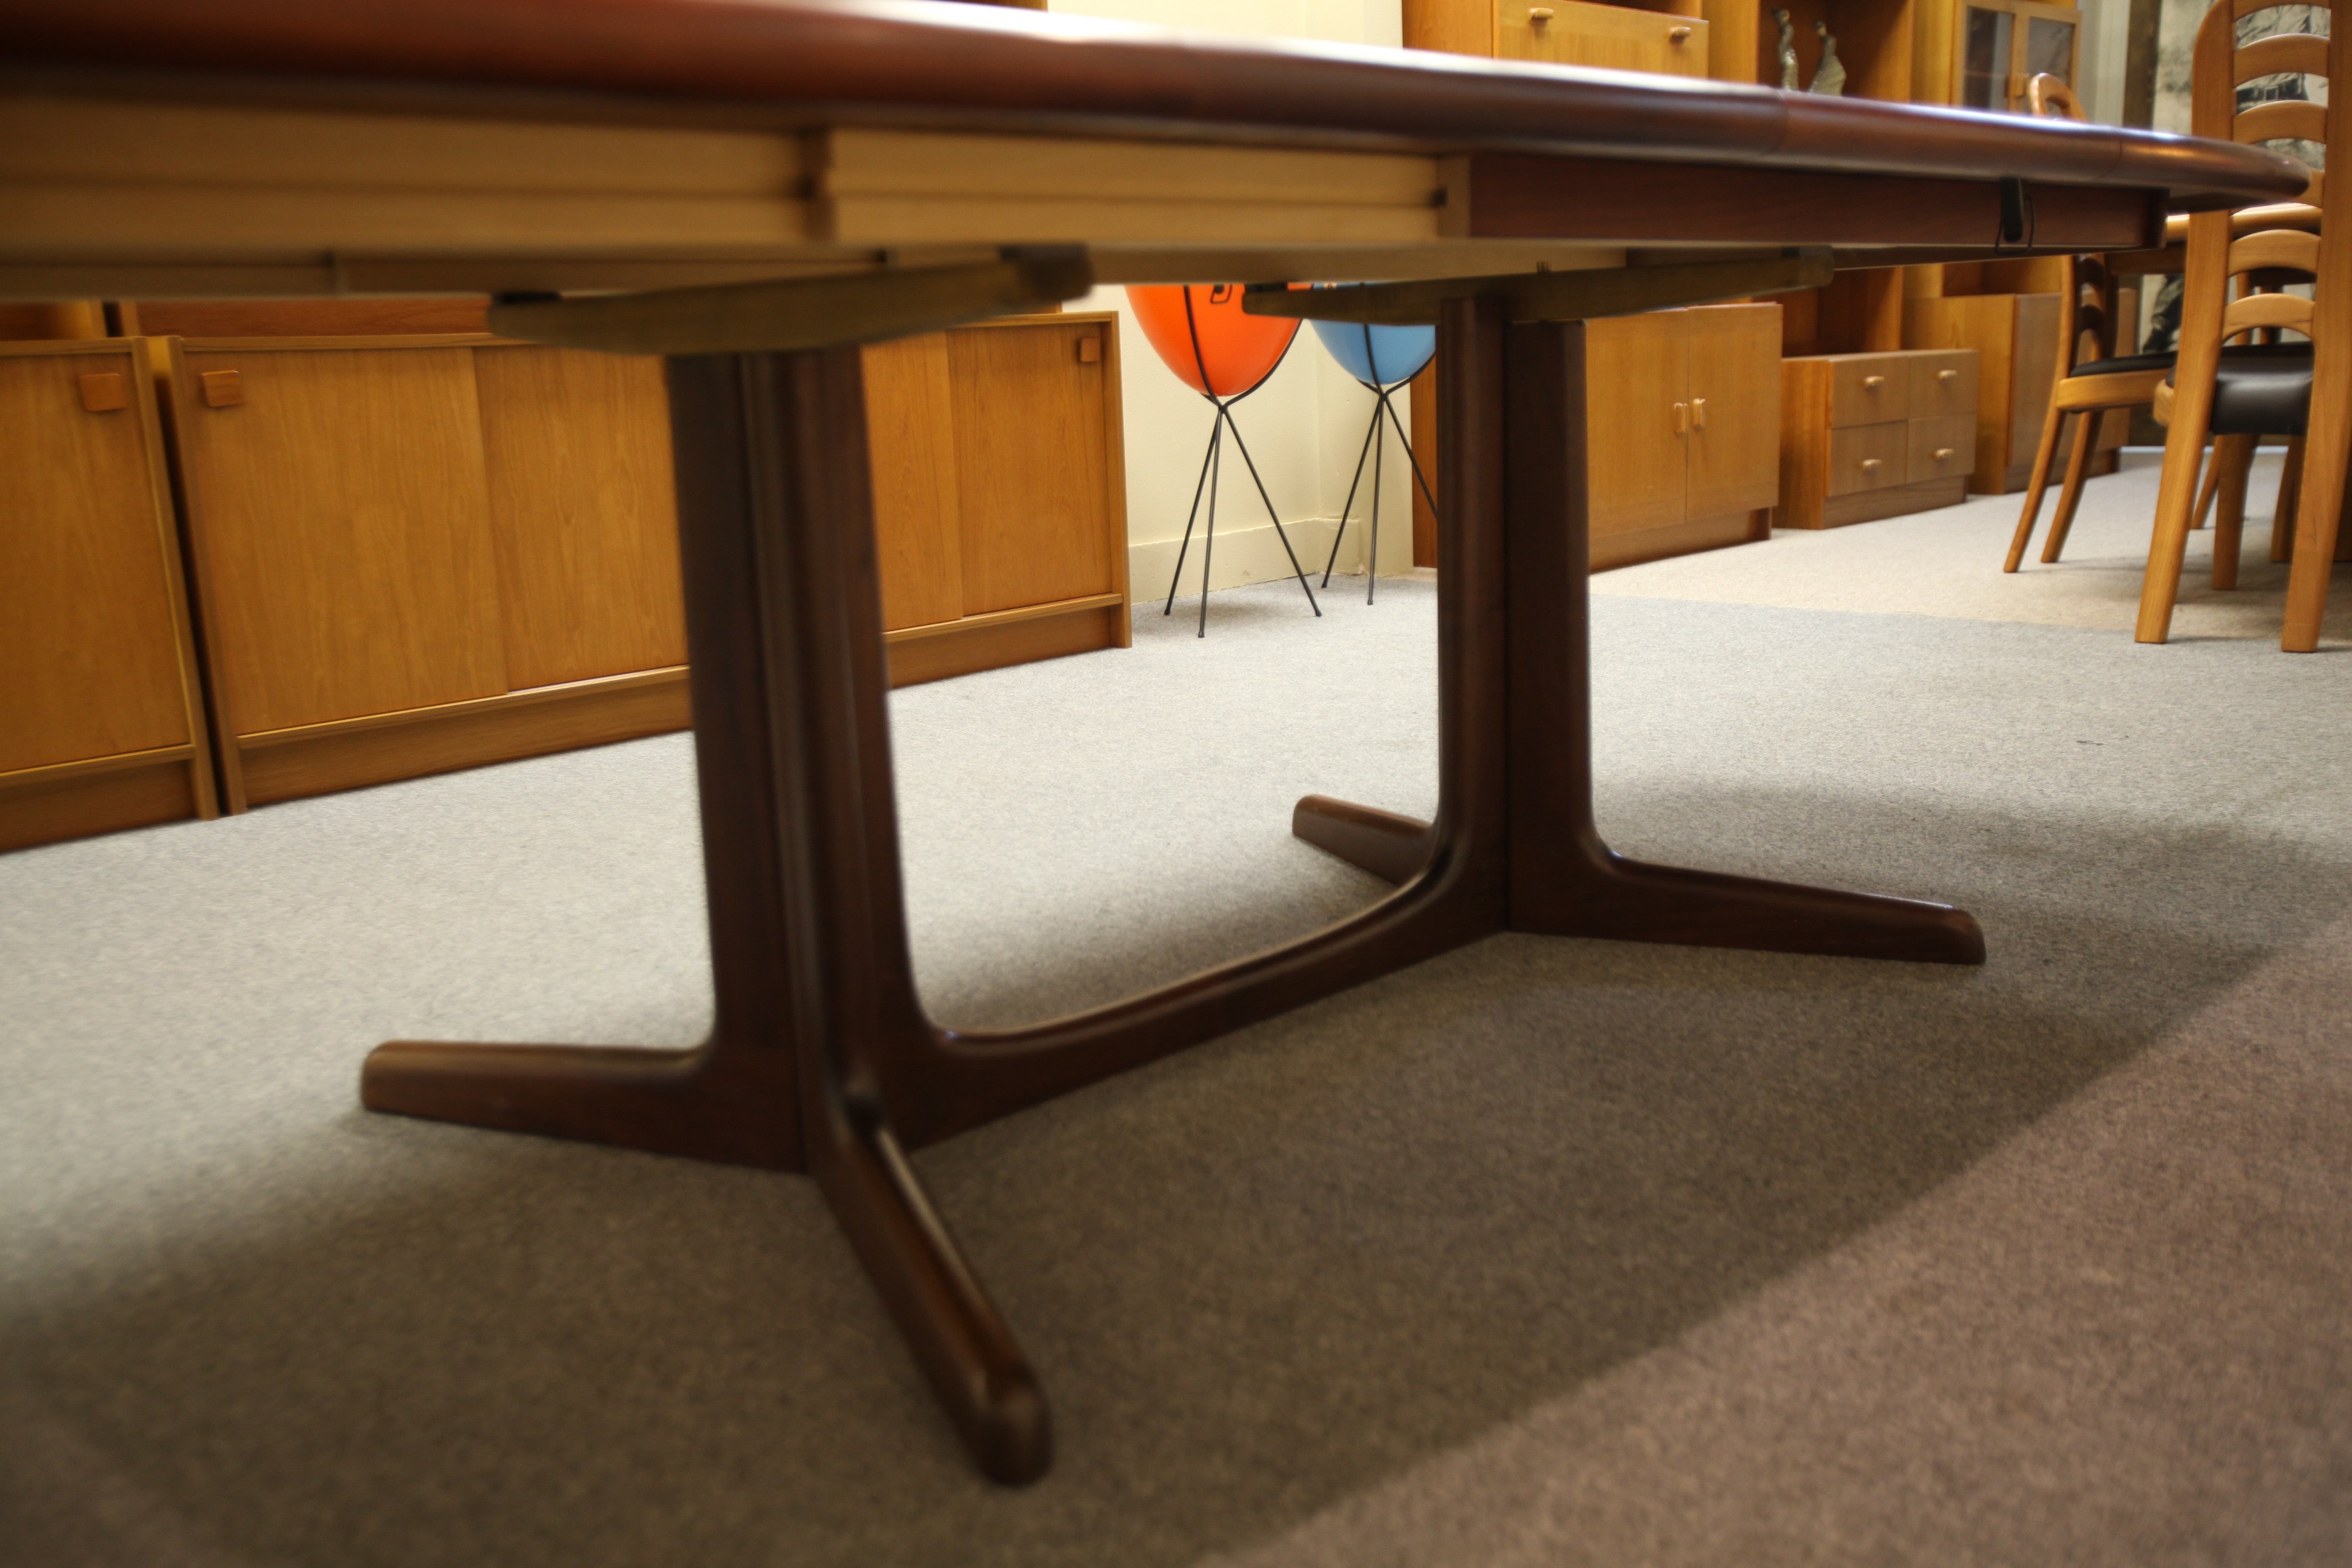 Danish Rosewood Dining Table (Gudme Mobelfabrik) 102"x41.5" with (2) leafs.